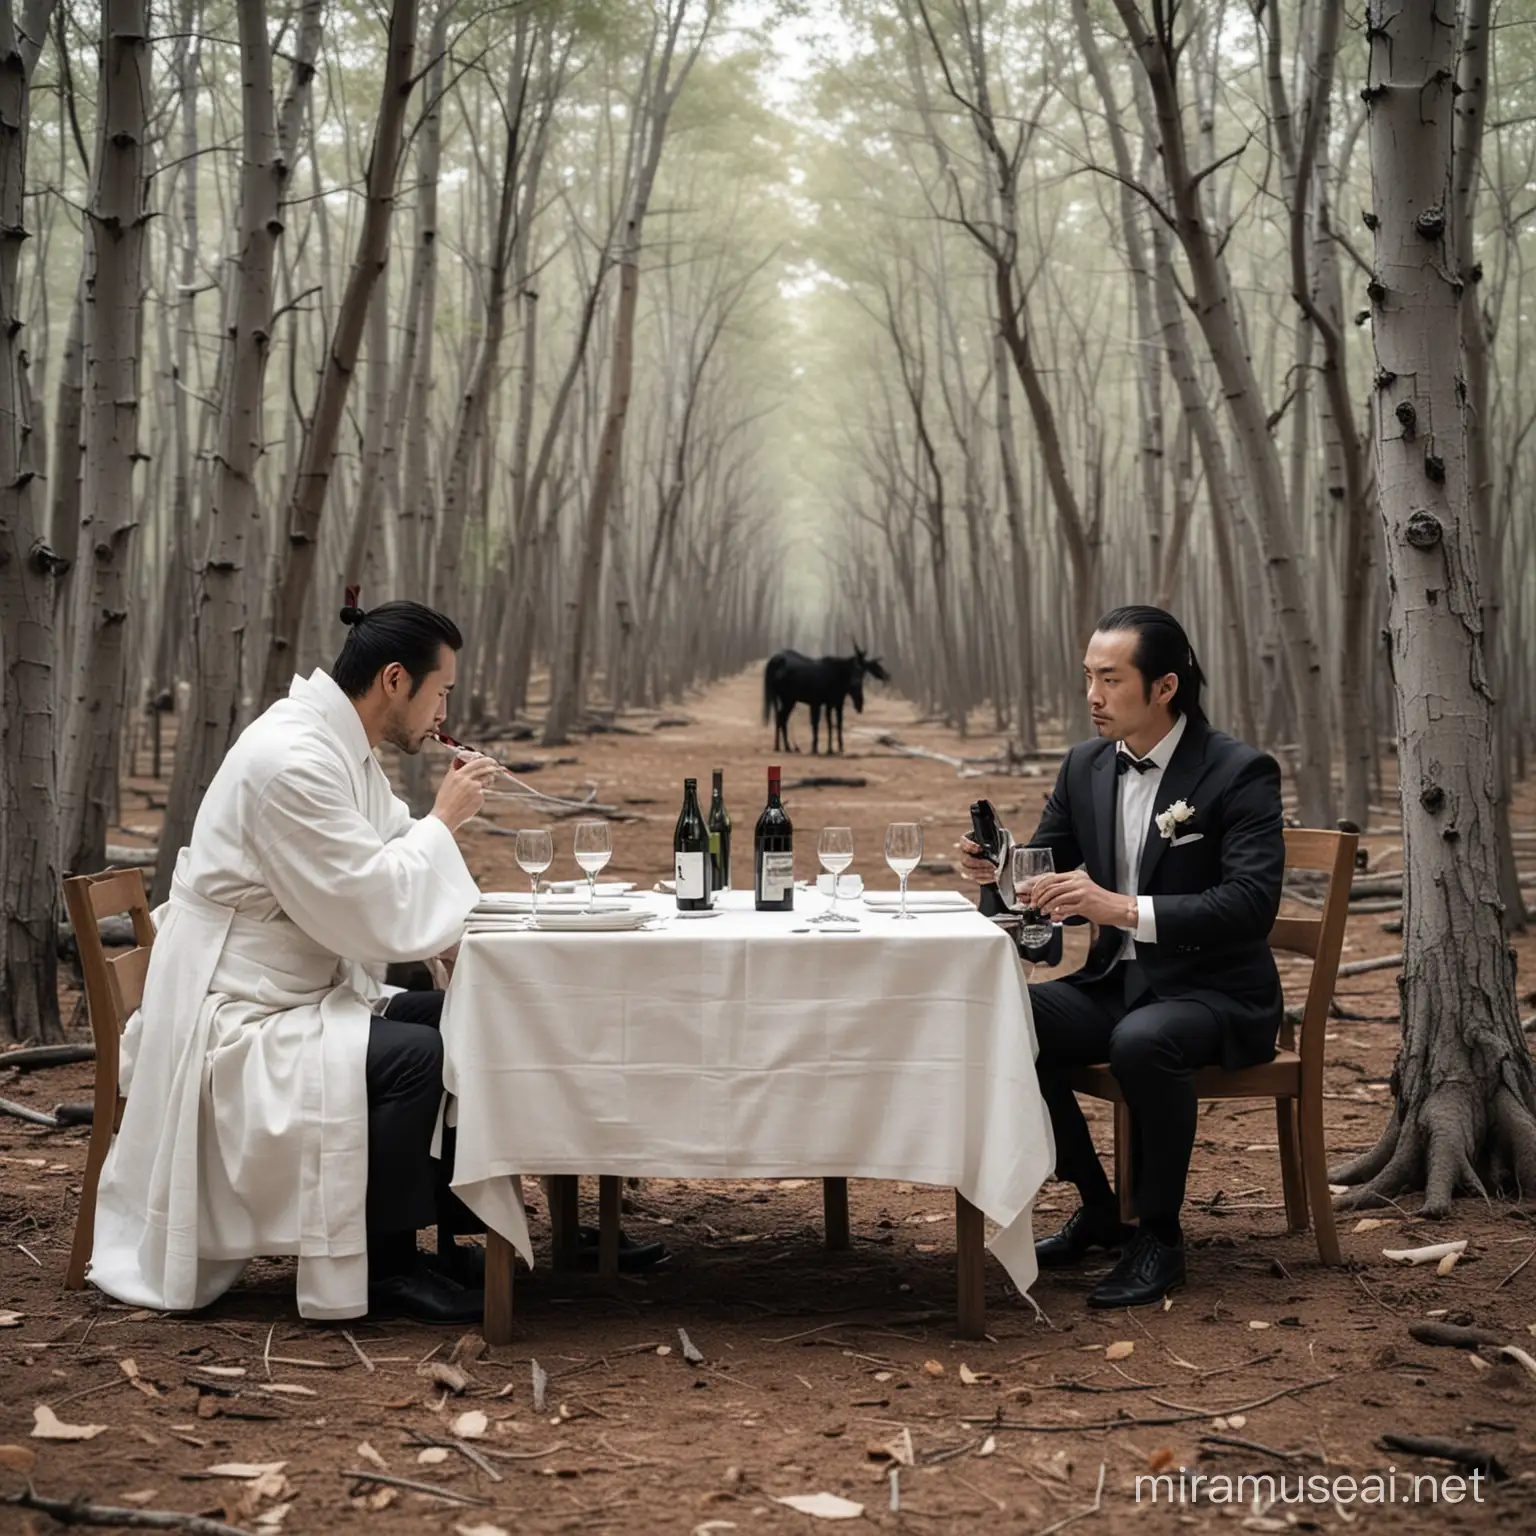 samurai in a ghost forest in a suit and tie drinking wine with the devil, sitting by a table for two with a white cloth